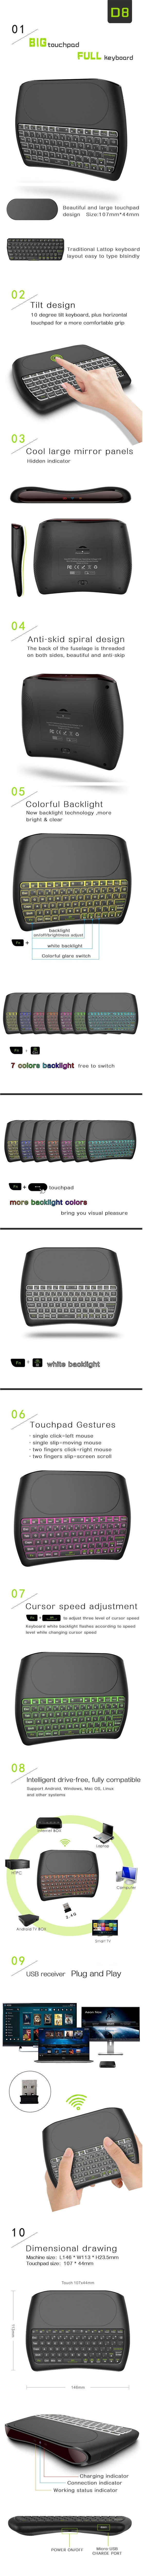 Mini-I8-D8-S-Laser-Version-wireless-24GHz-keyboard-MX3-Air-Mouse-1346890